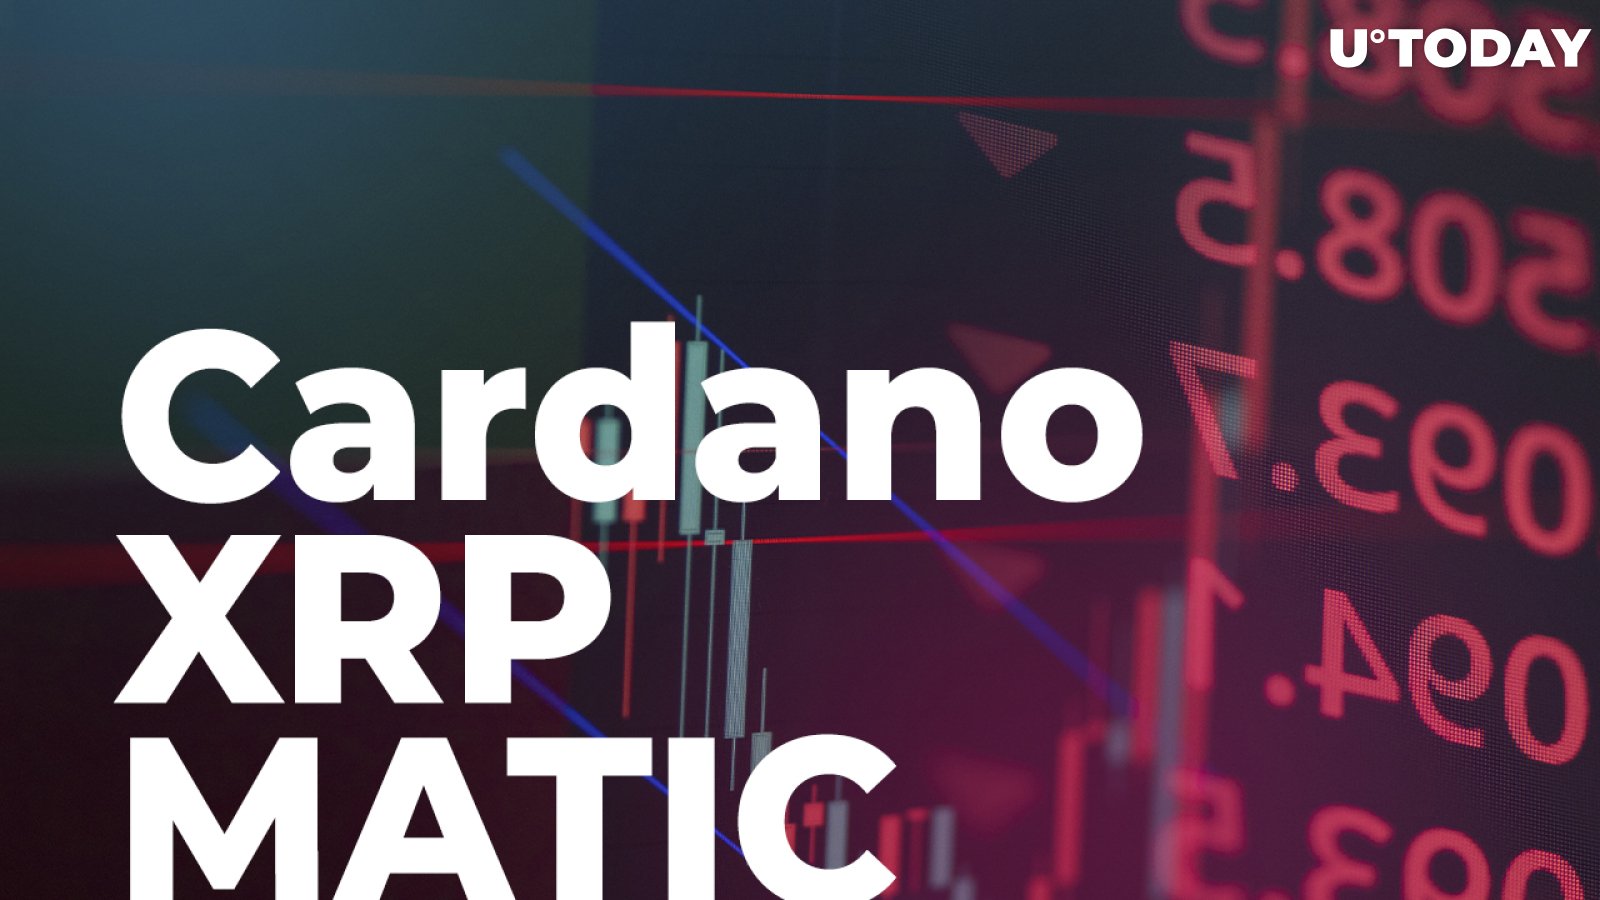 Cardano, XRP and MATIC Are Down by Double Digits as Bitcoin Falls to New Lows